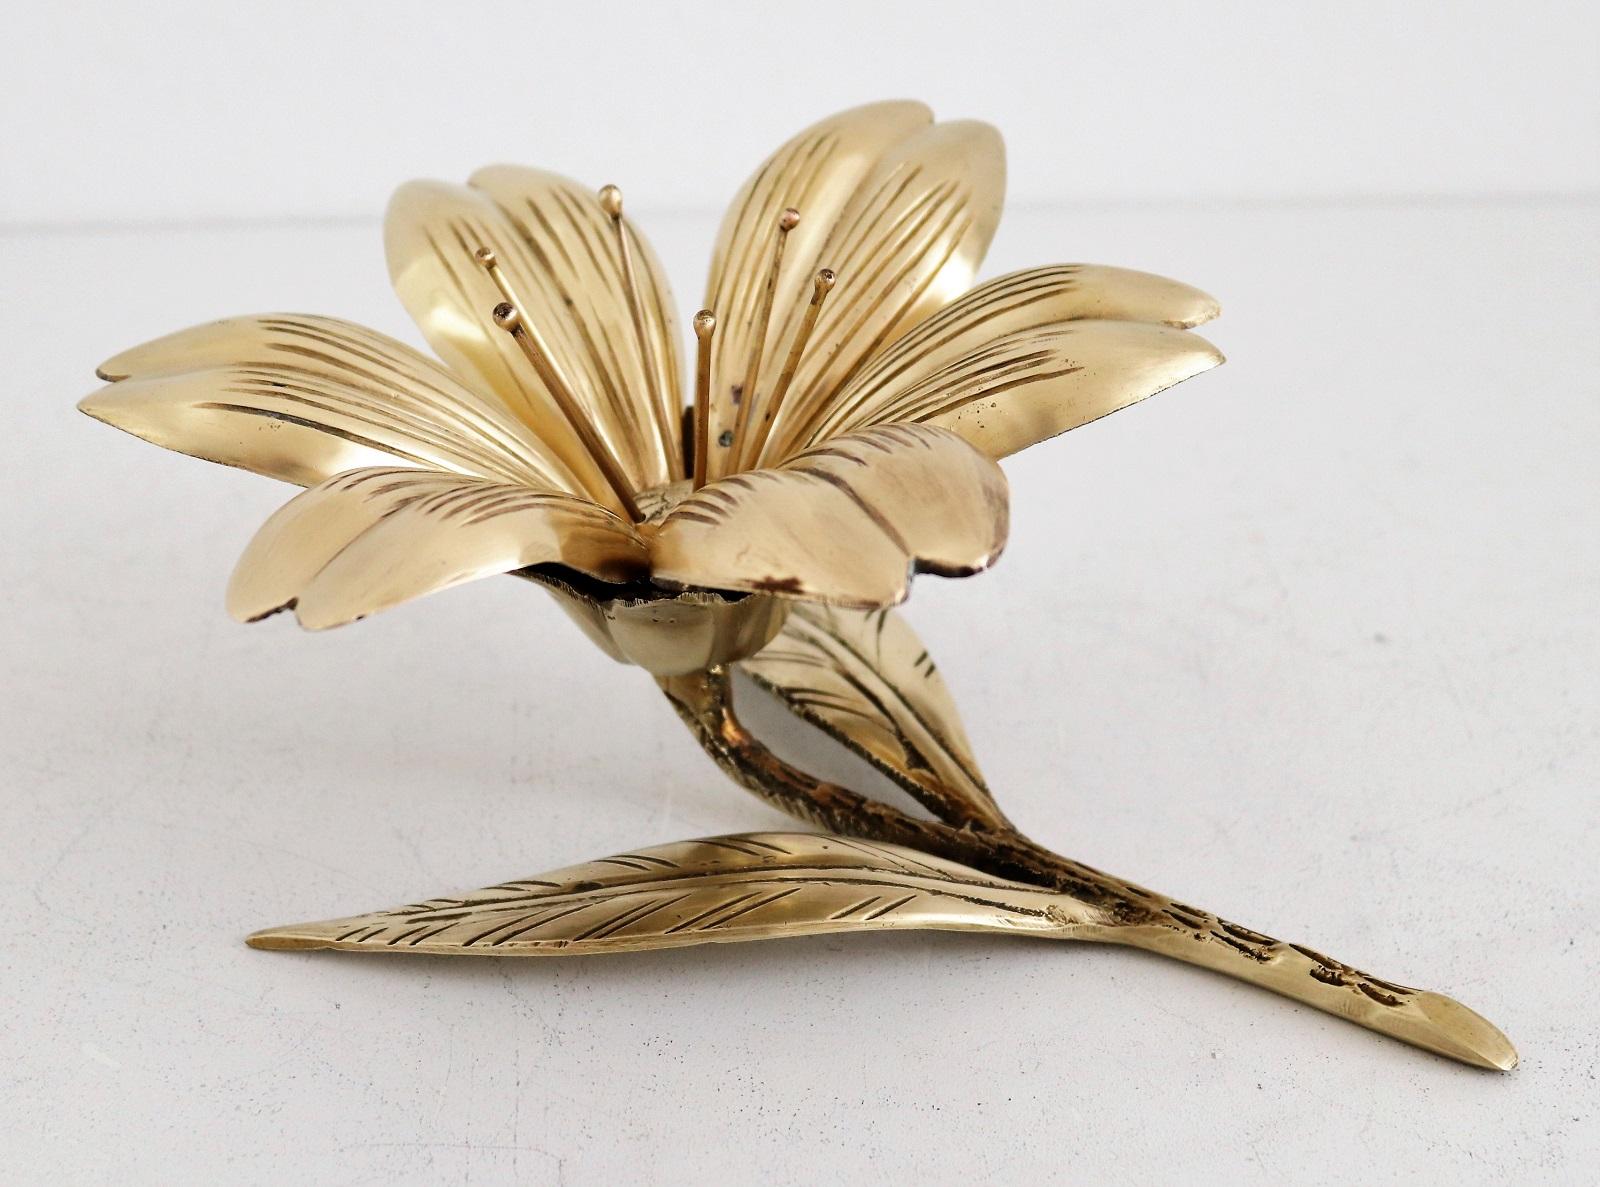 Italian Midcentury Flower in Brass with Petal Ashtrays for Cigarettes, 1950s 7